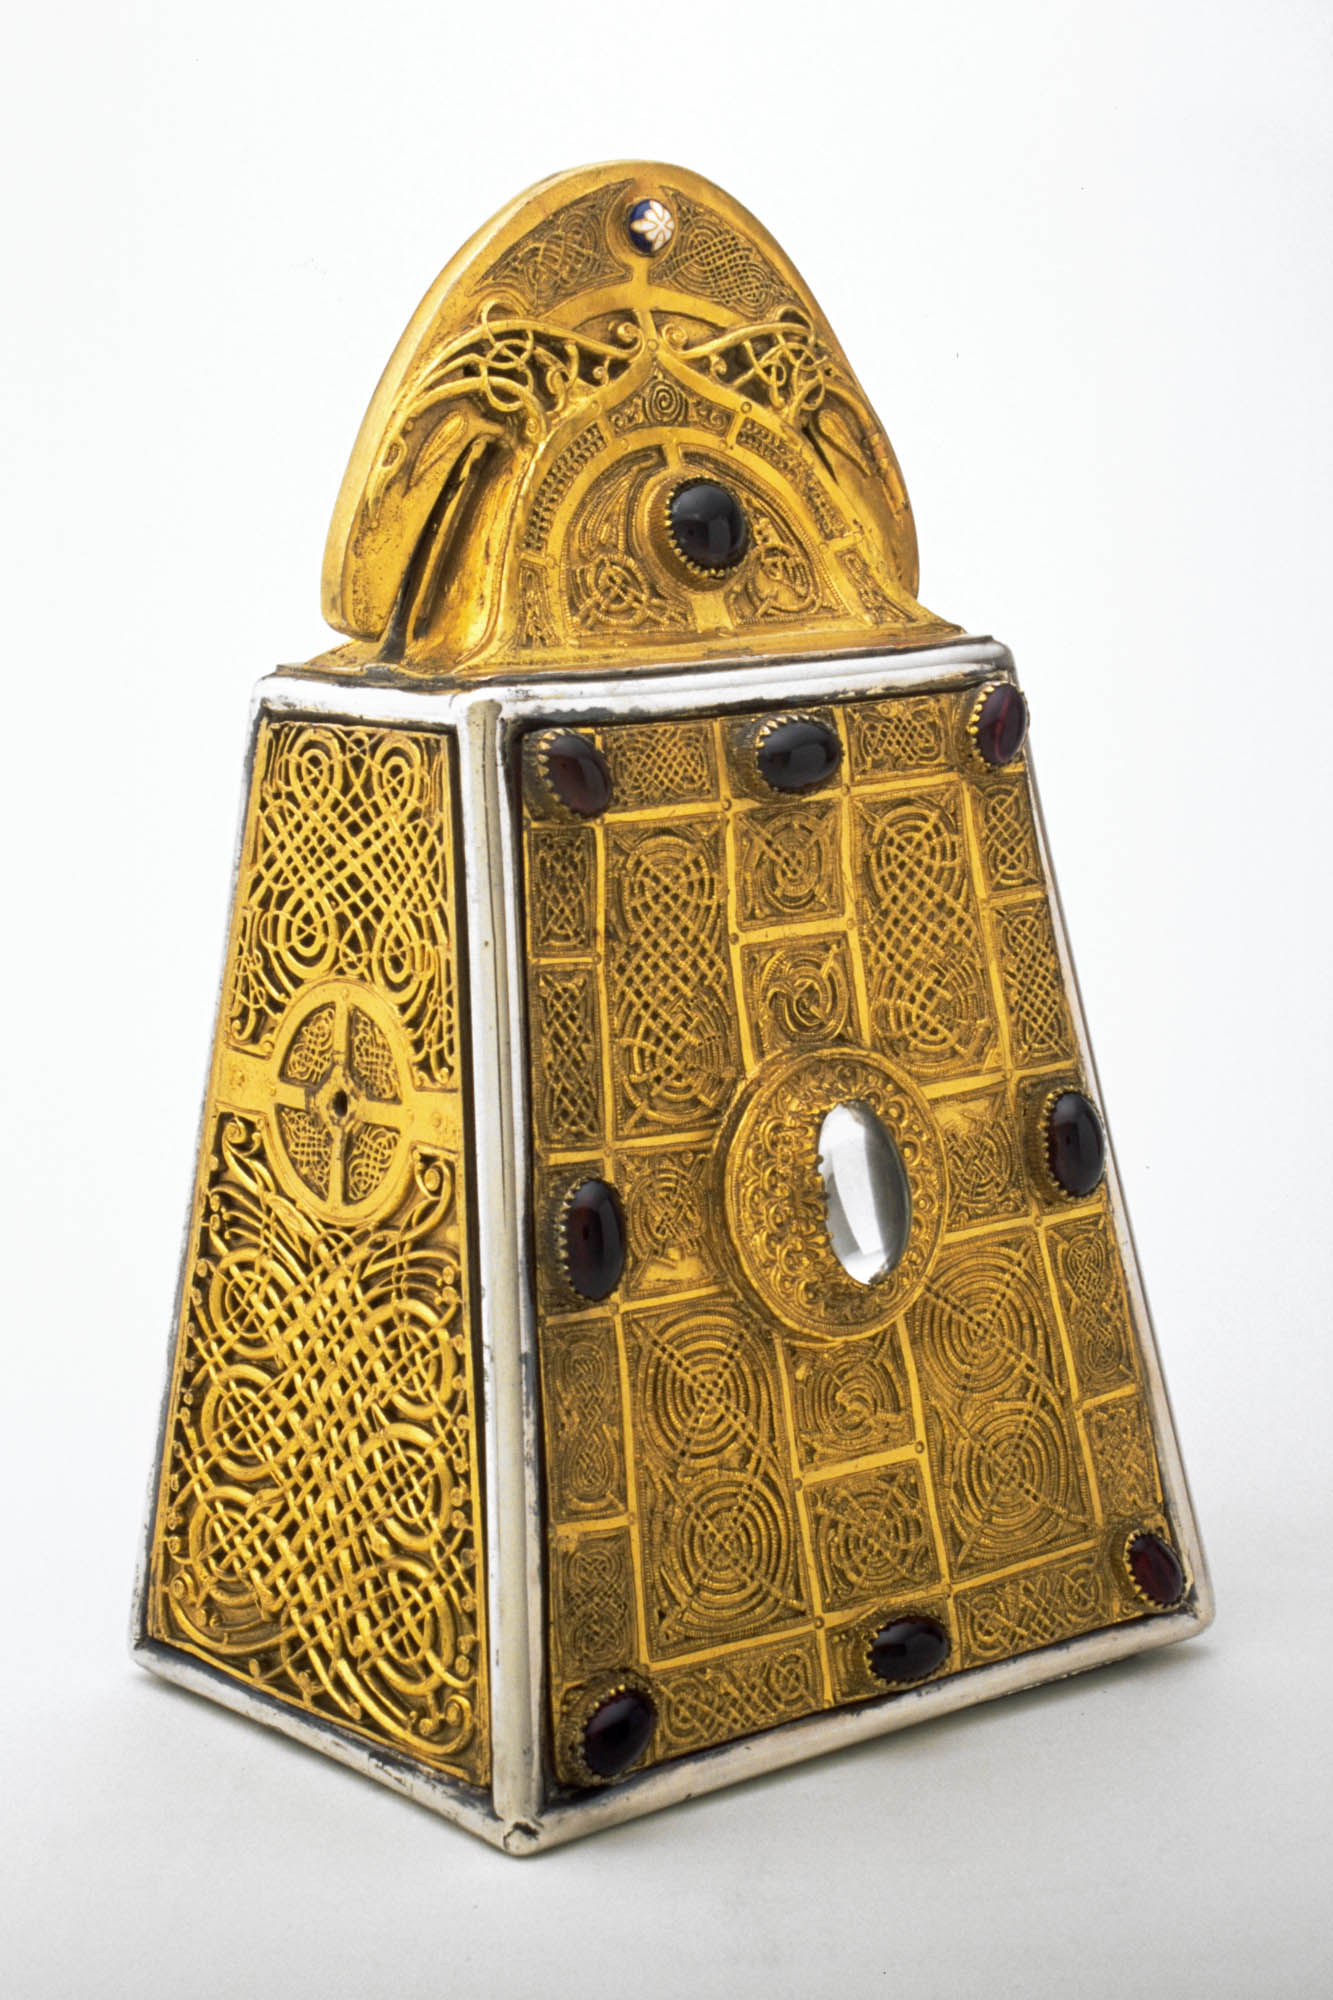 Ornate gold box in the shape of an upright trapezoidal prism covered in interlaced panels and studded with gems with semi-circular top